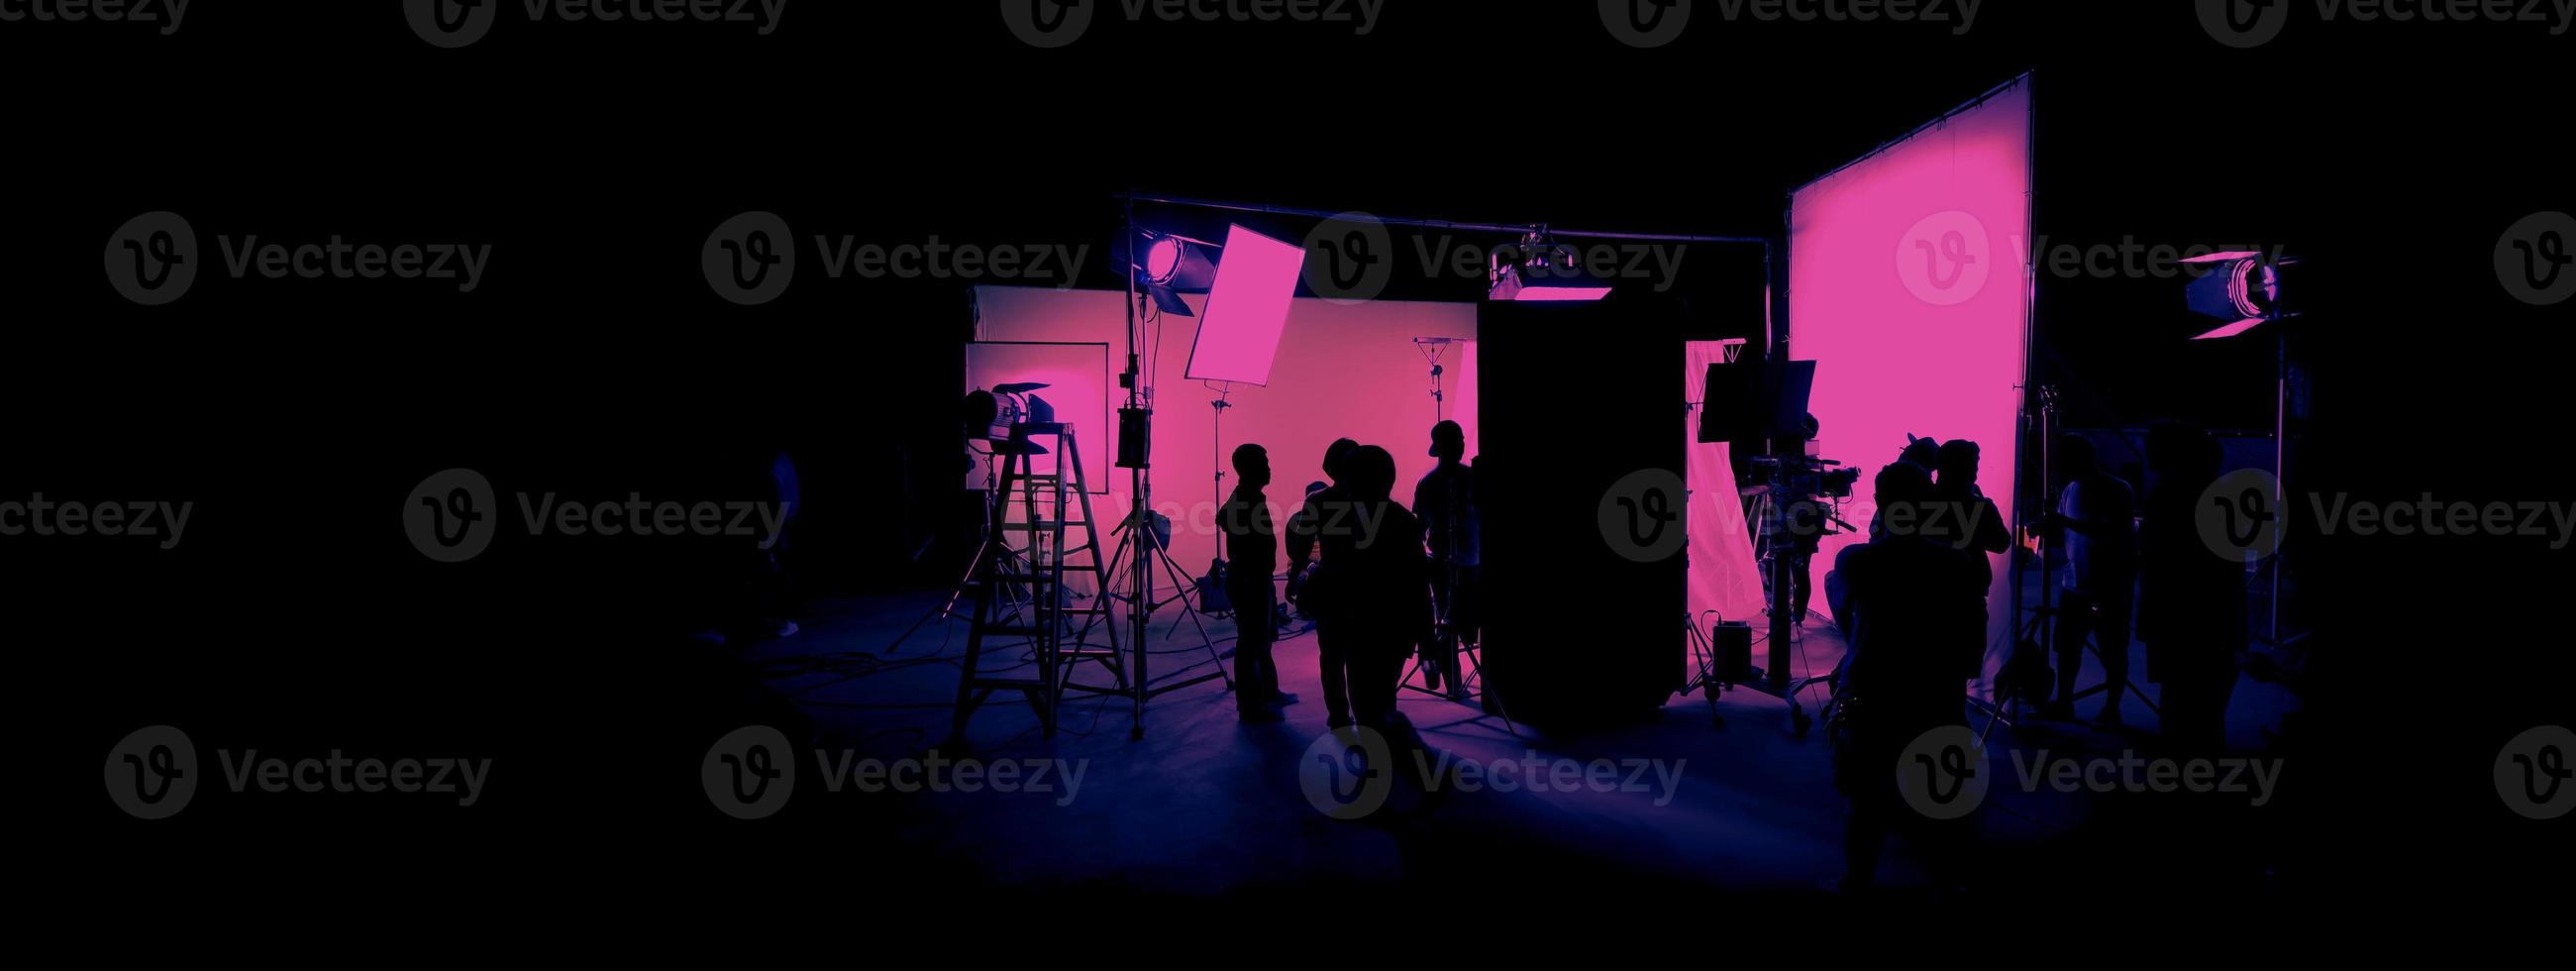 Silhouette images of film production. behind the scenes photo